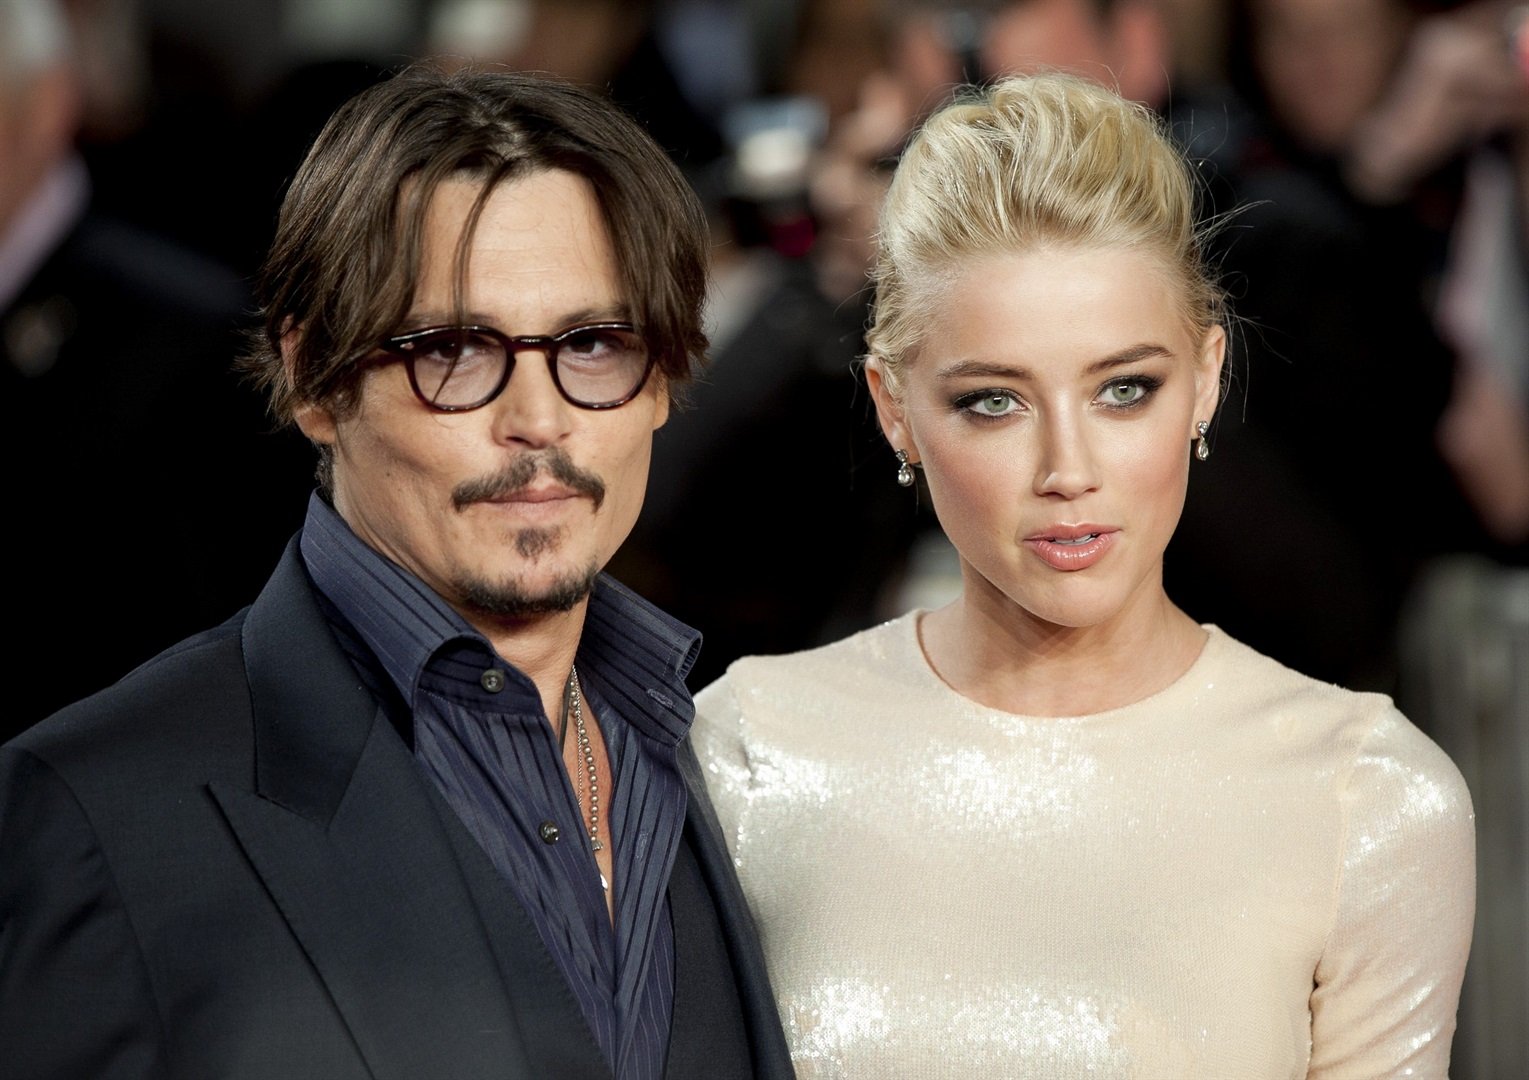 Johnny Depp and Amber Heard at the European premiere of their film "The Rum Diary" in London in 2011.